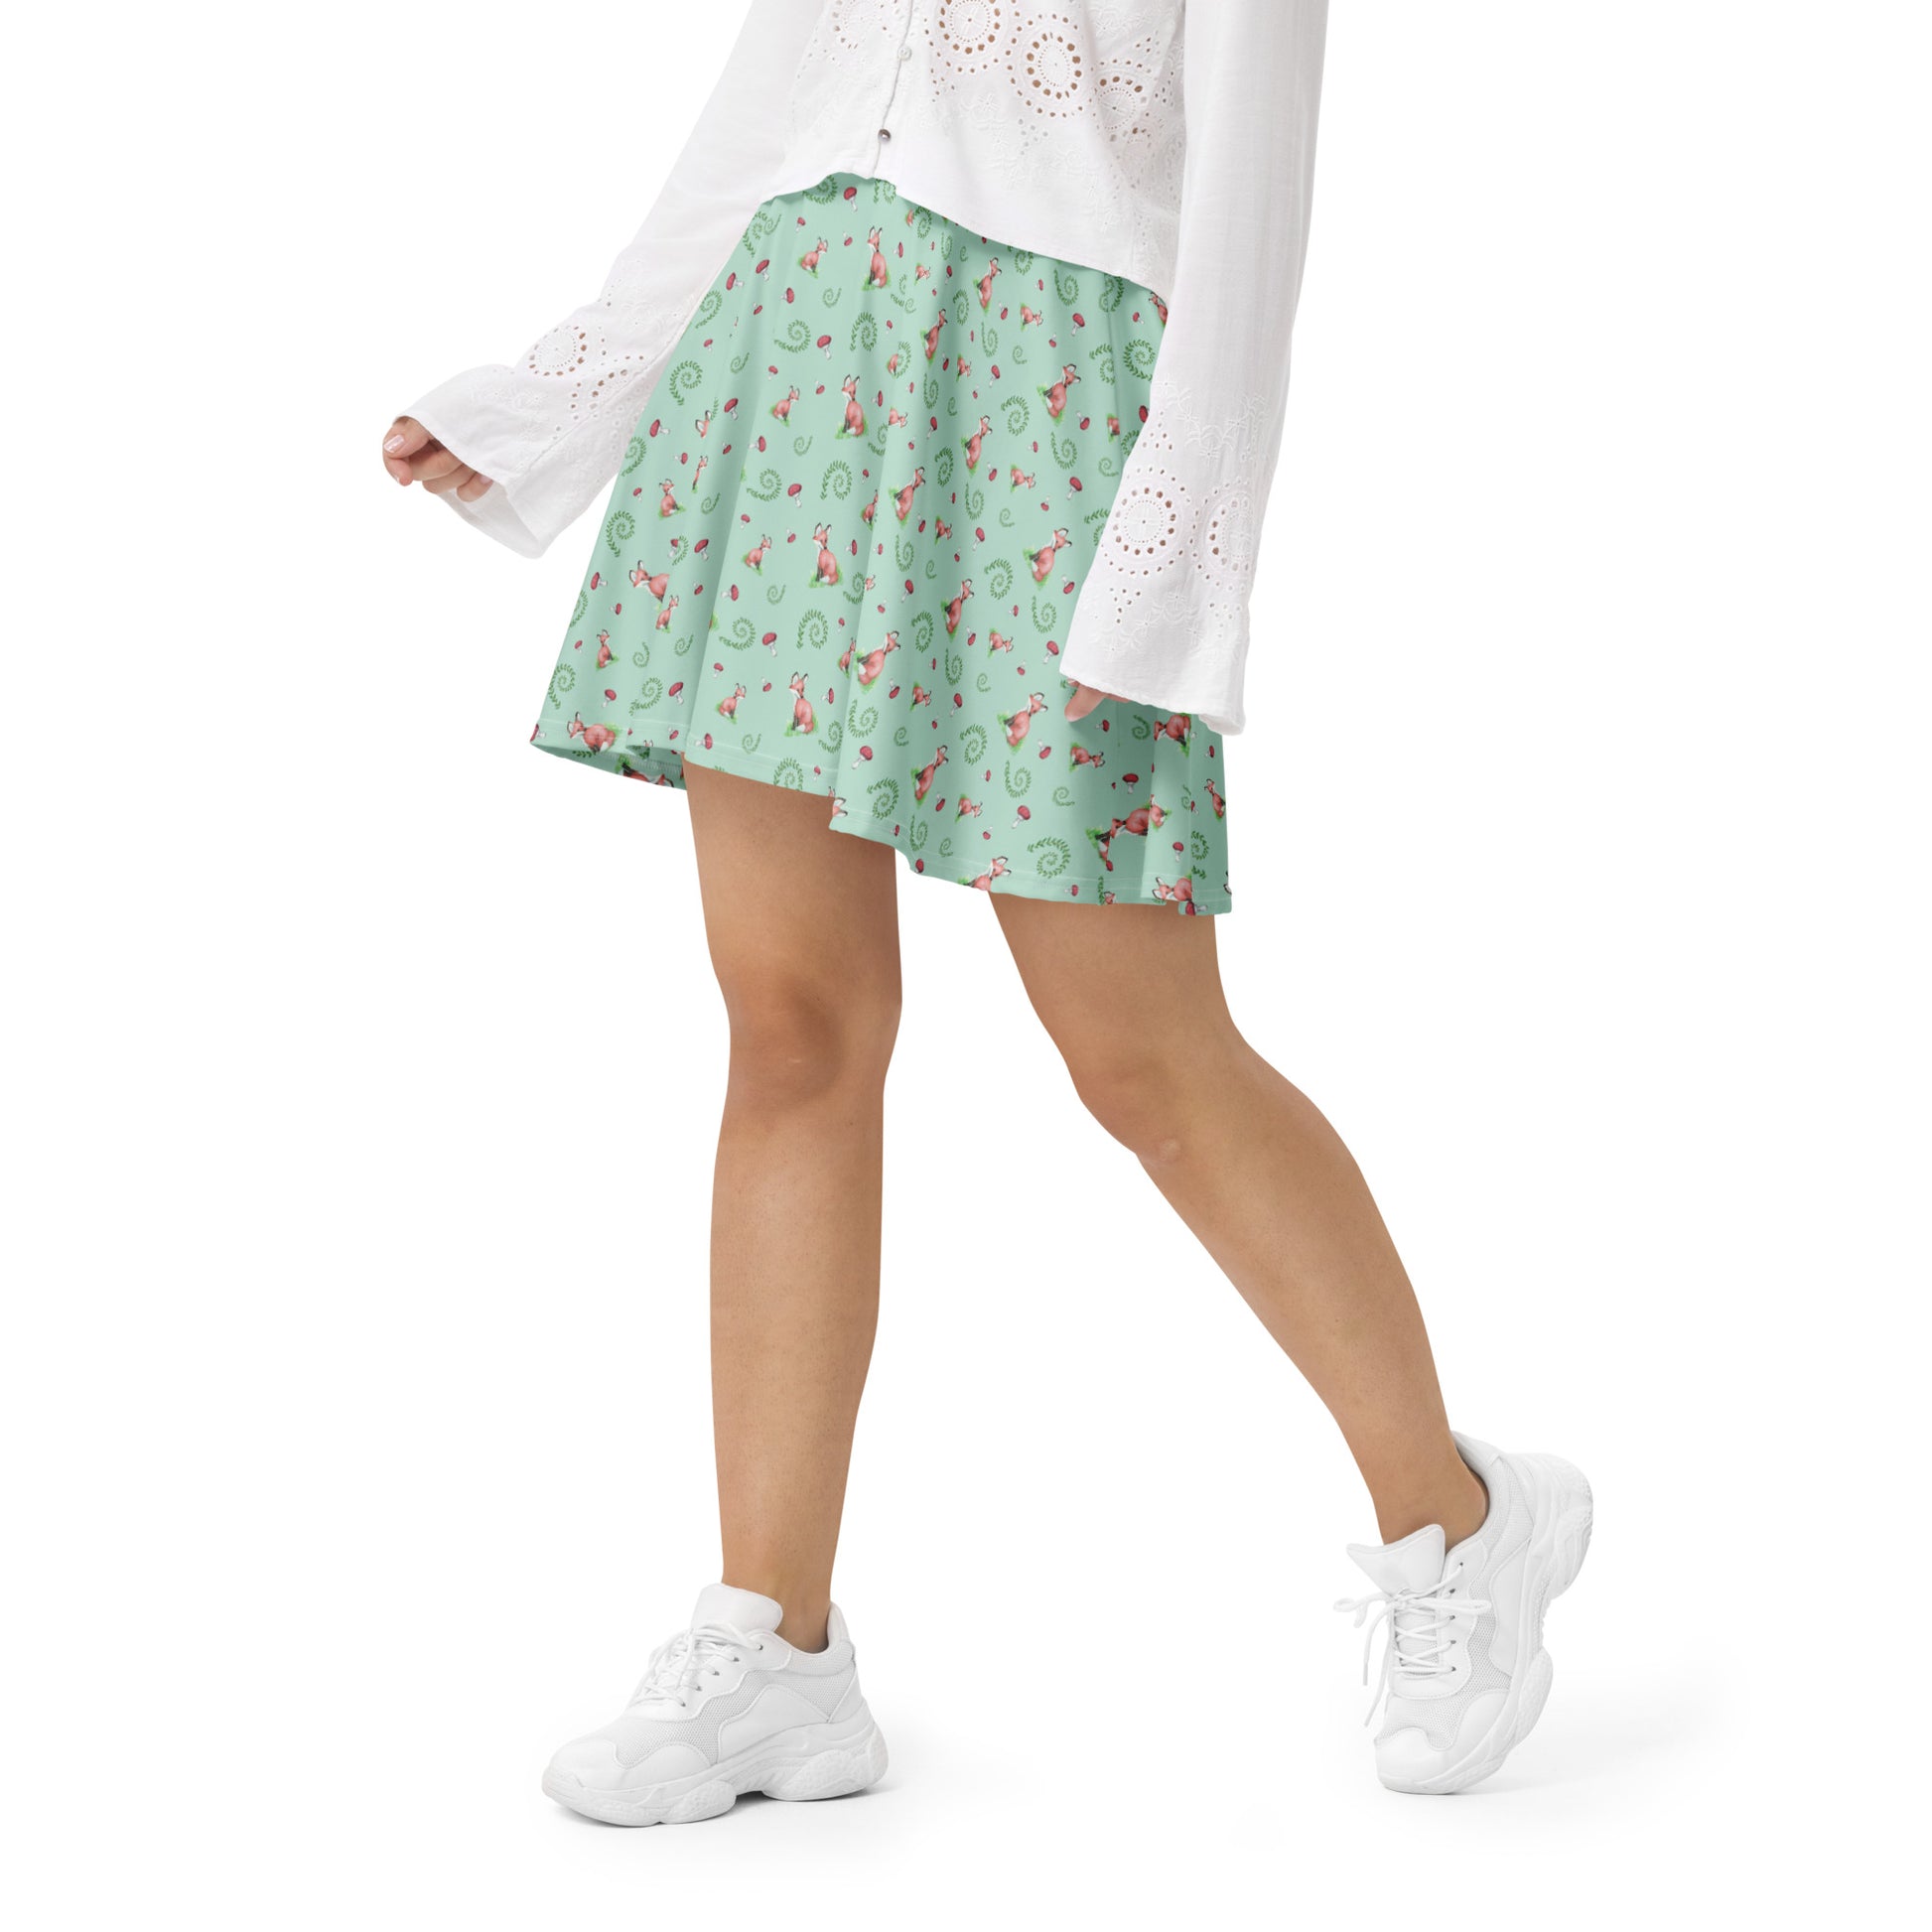 Forest Fox patterned skater skirt with mushrooms and ferns. Flared cut, mid-thigh length with elastic waist. Shown on female model with white sweater and shoes.